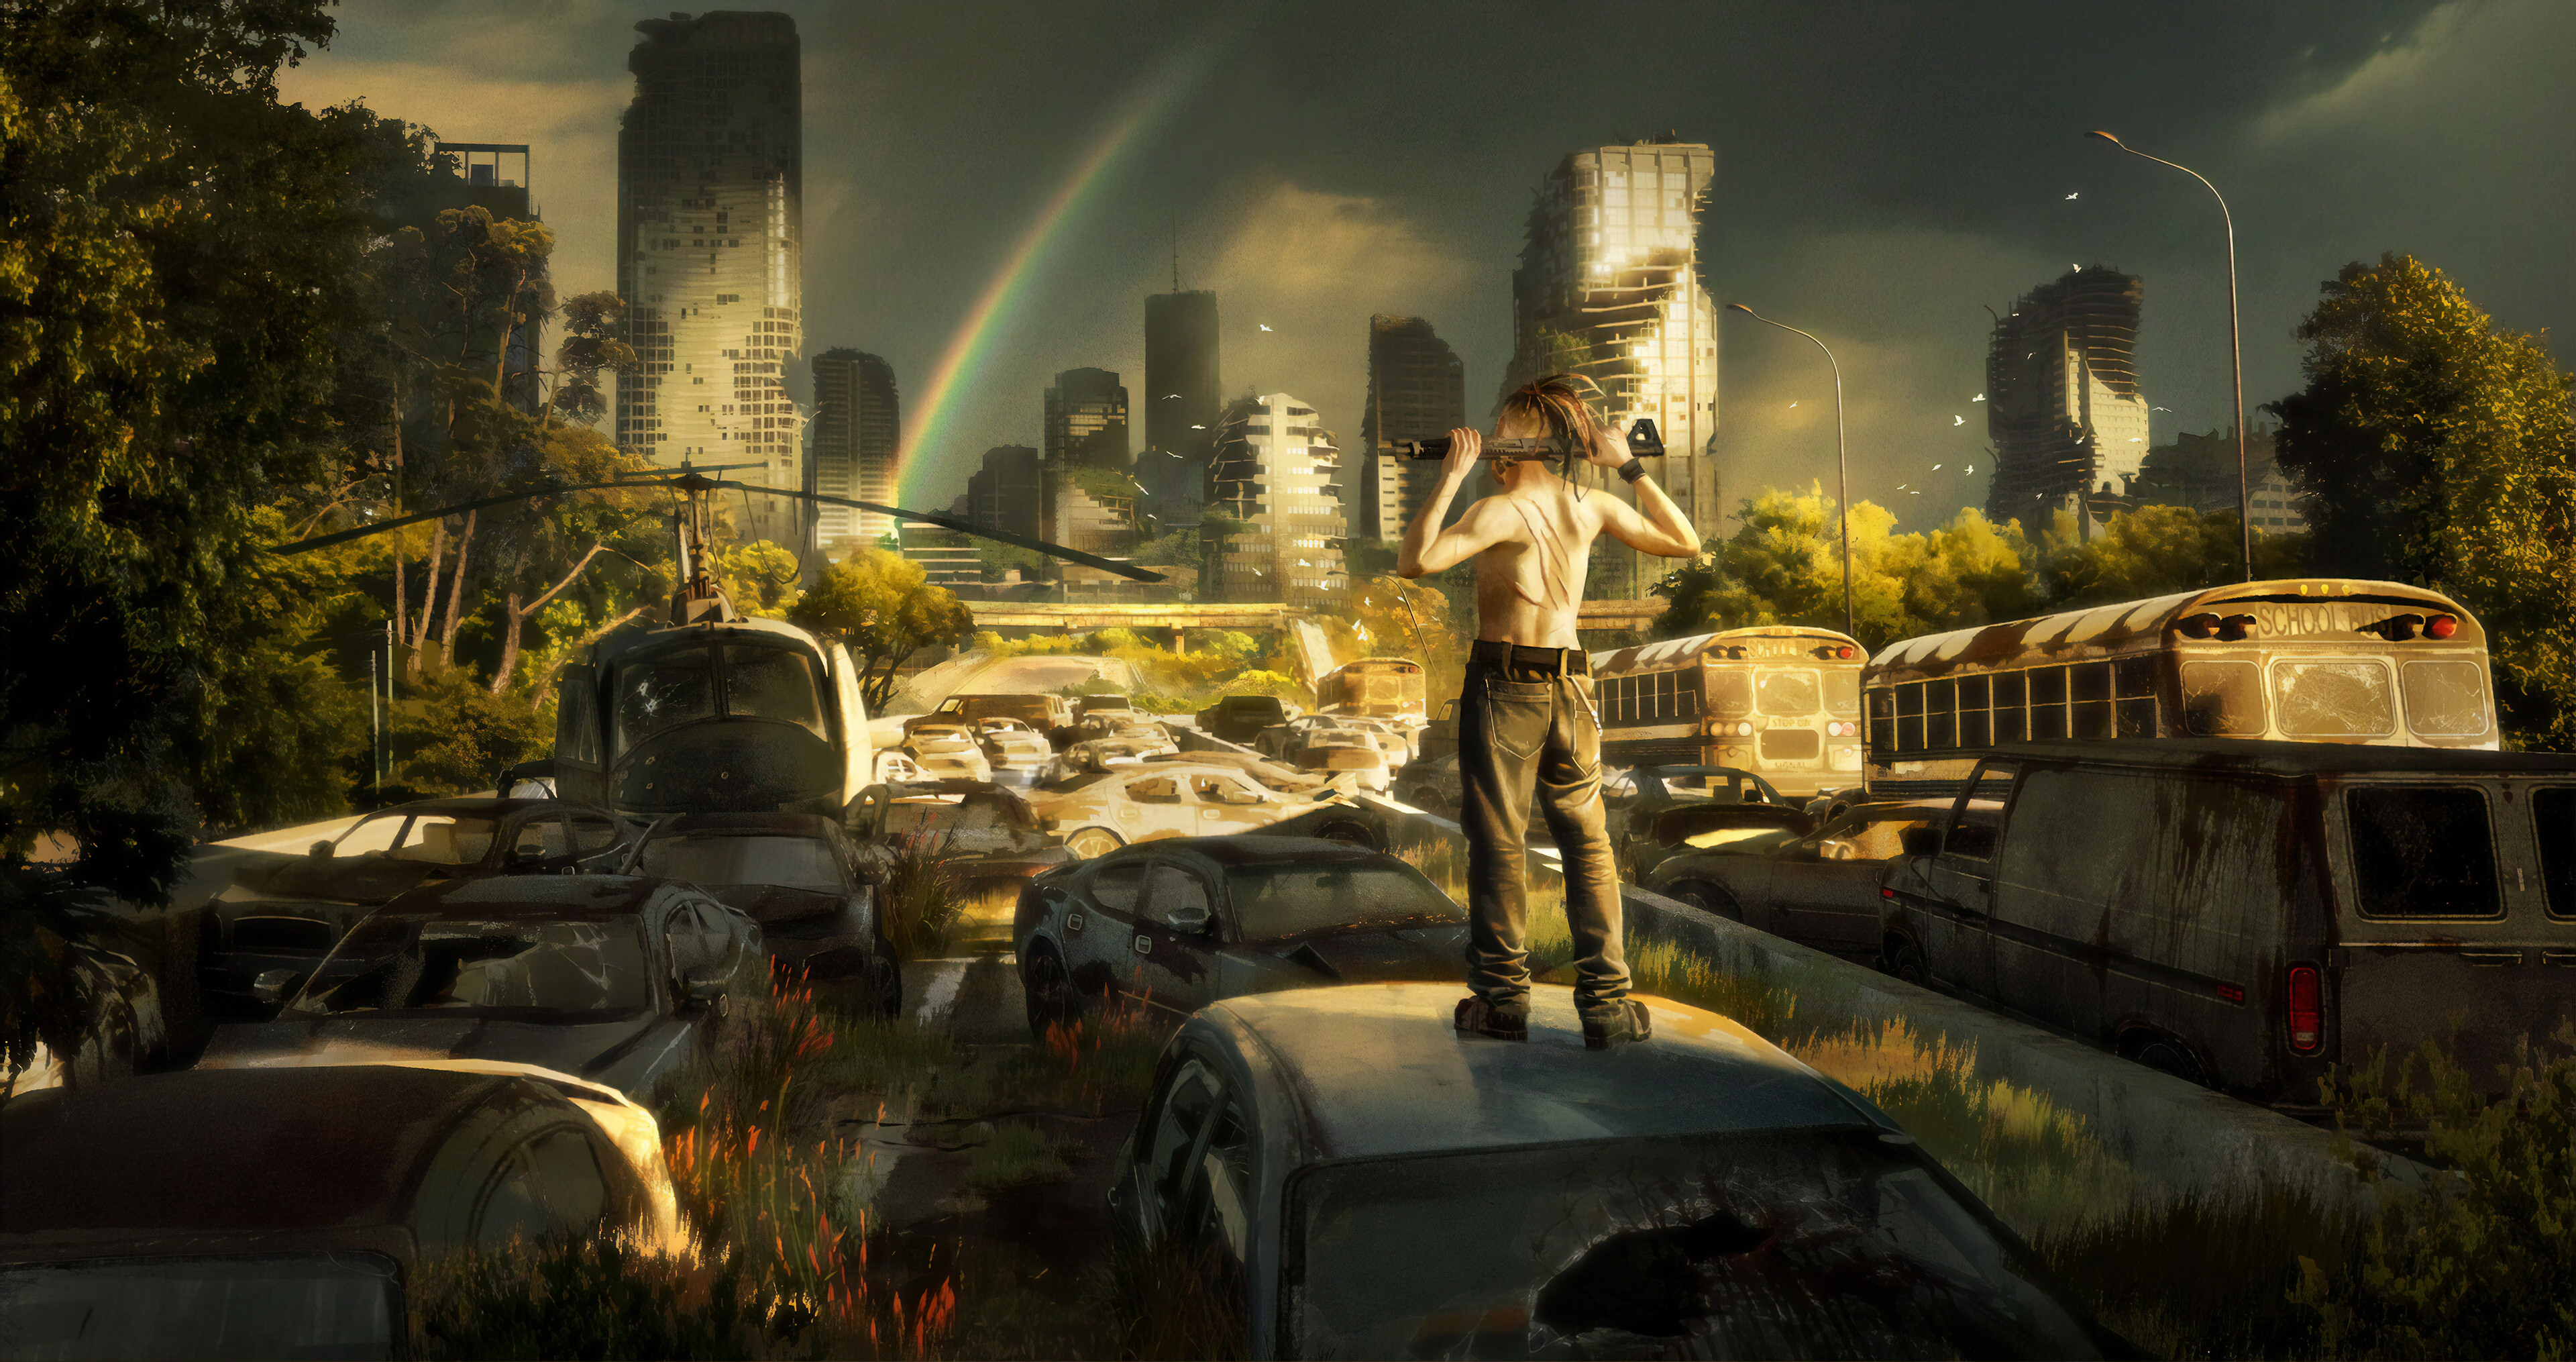 Post-apocalypse: An event resulting in great destruction and violent change, Science fiction. 3840x2030 HD Background.